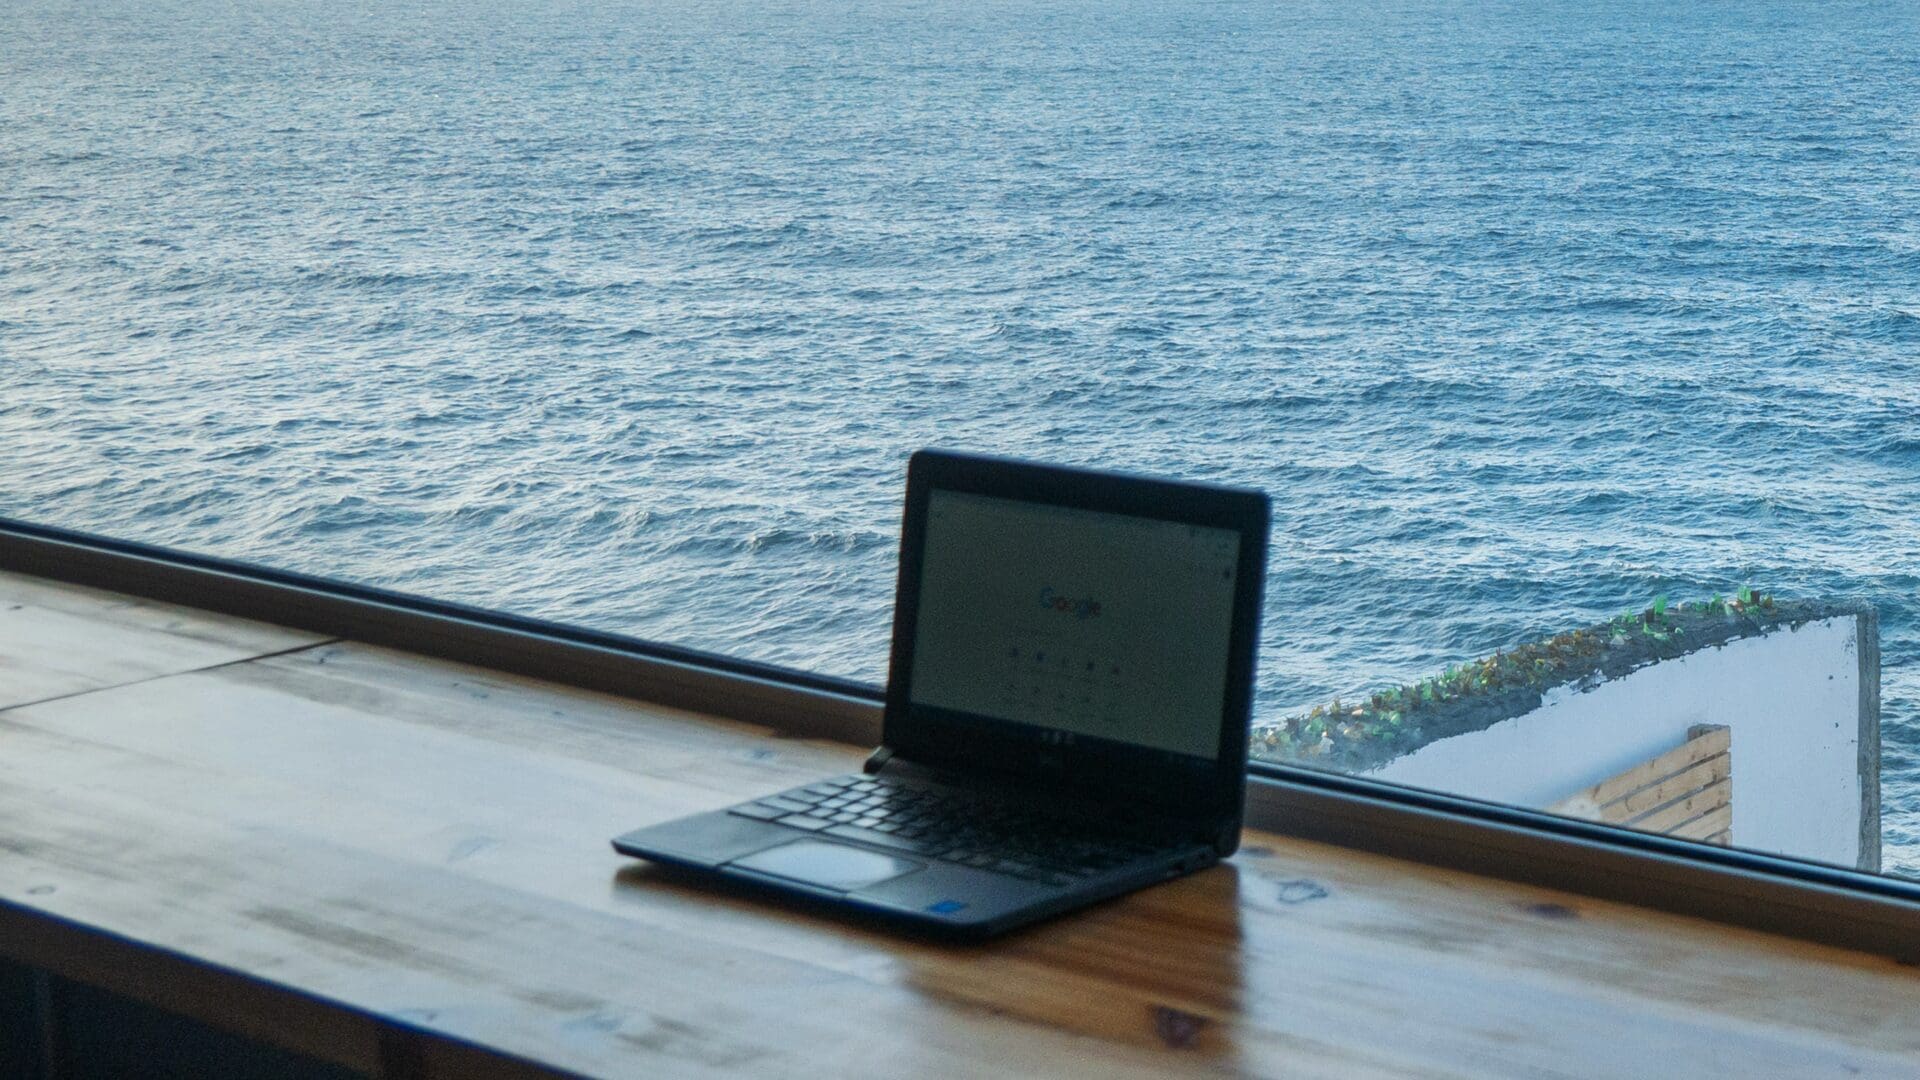 What are countries doing for digital nomads? A laptop against a view of the Atlantic Ocean